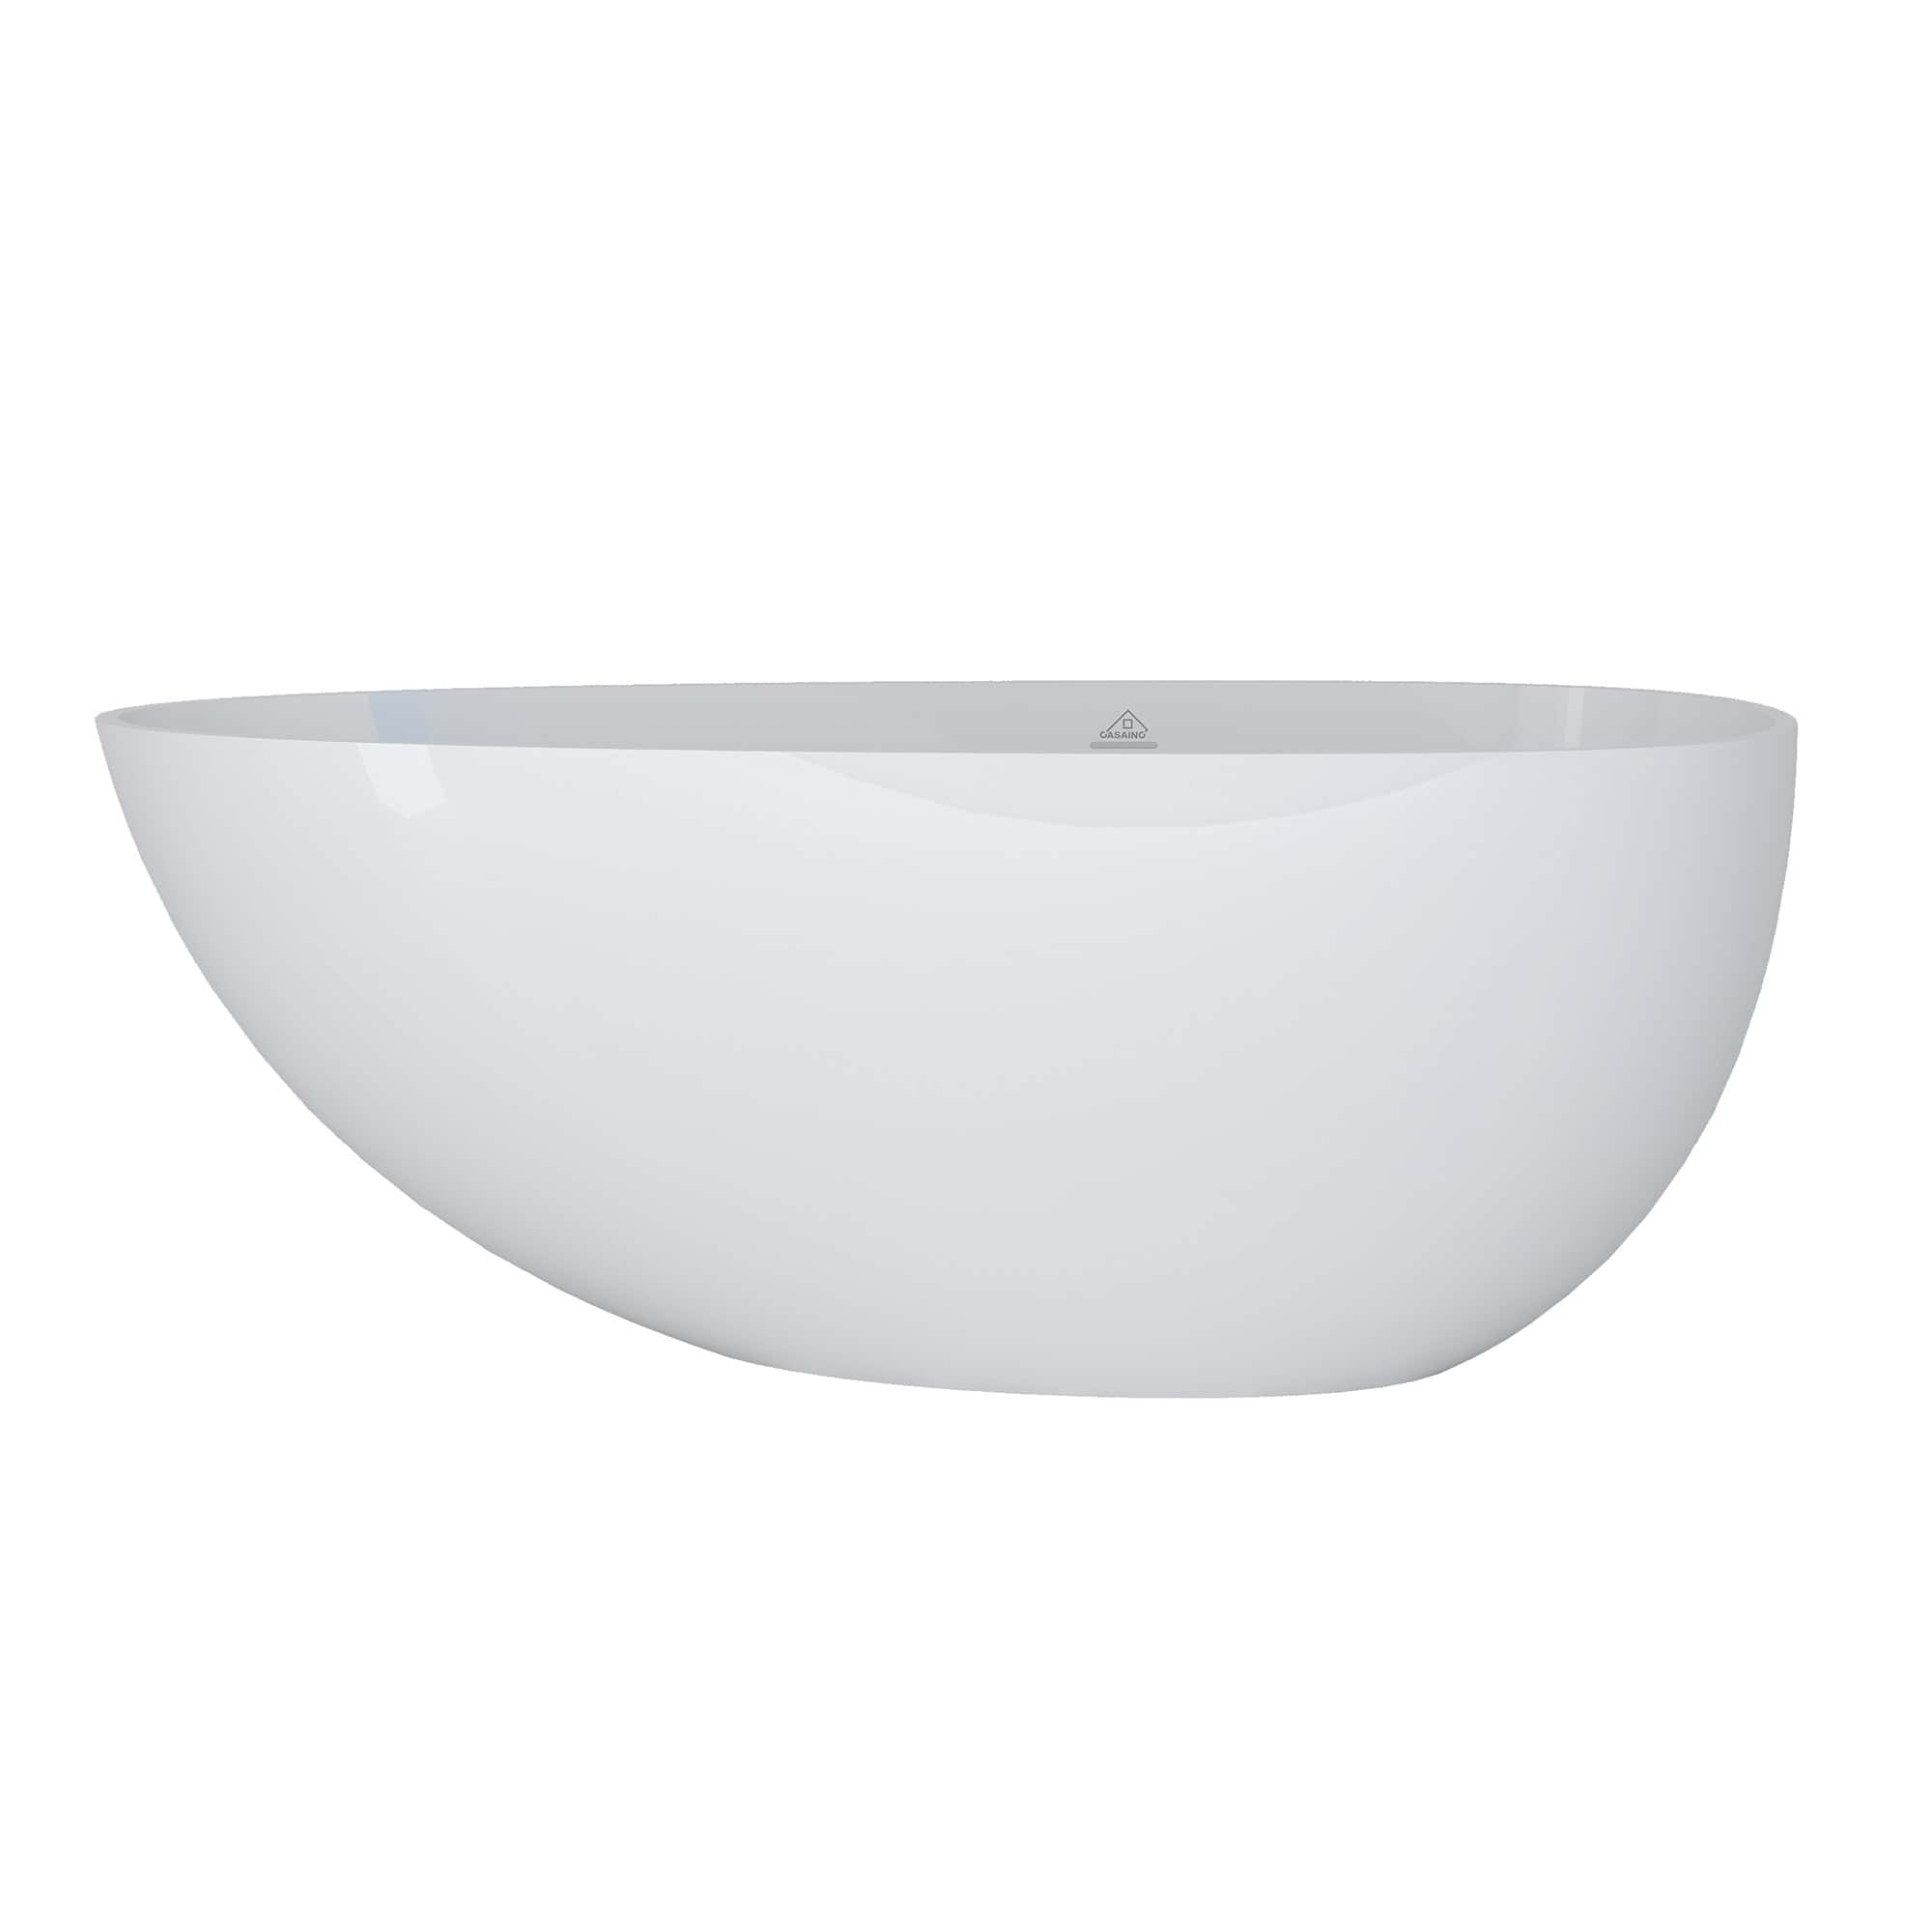 59" / 67" Freestanding Solid Surface Egg Shaped Soaking Tub  with Overflow and Drain,  Glossy White Option